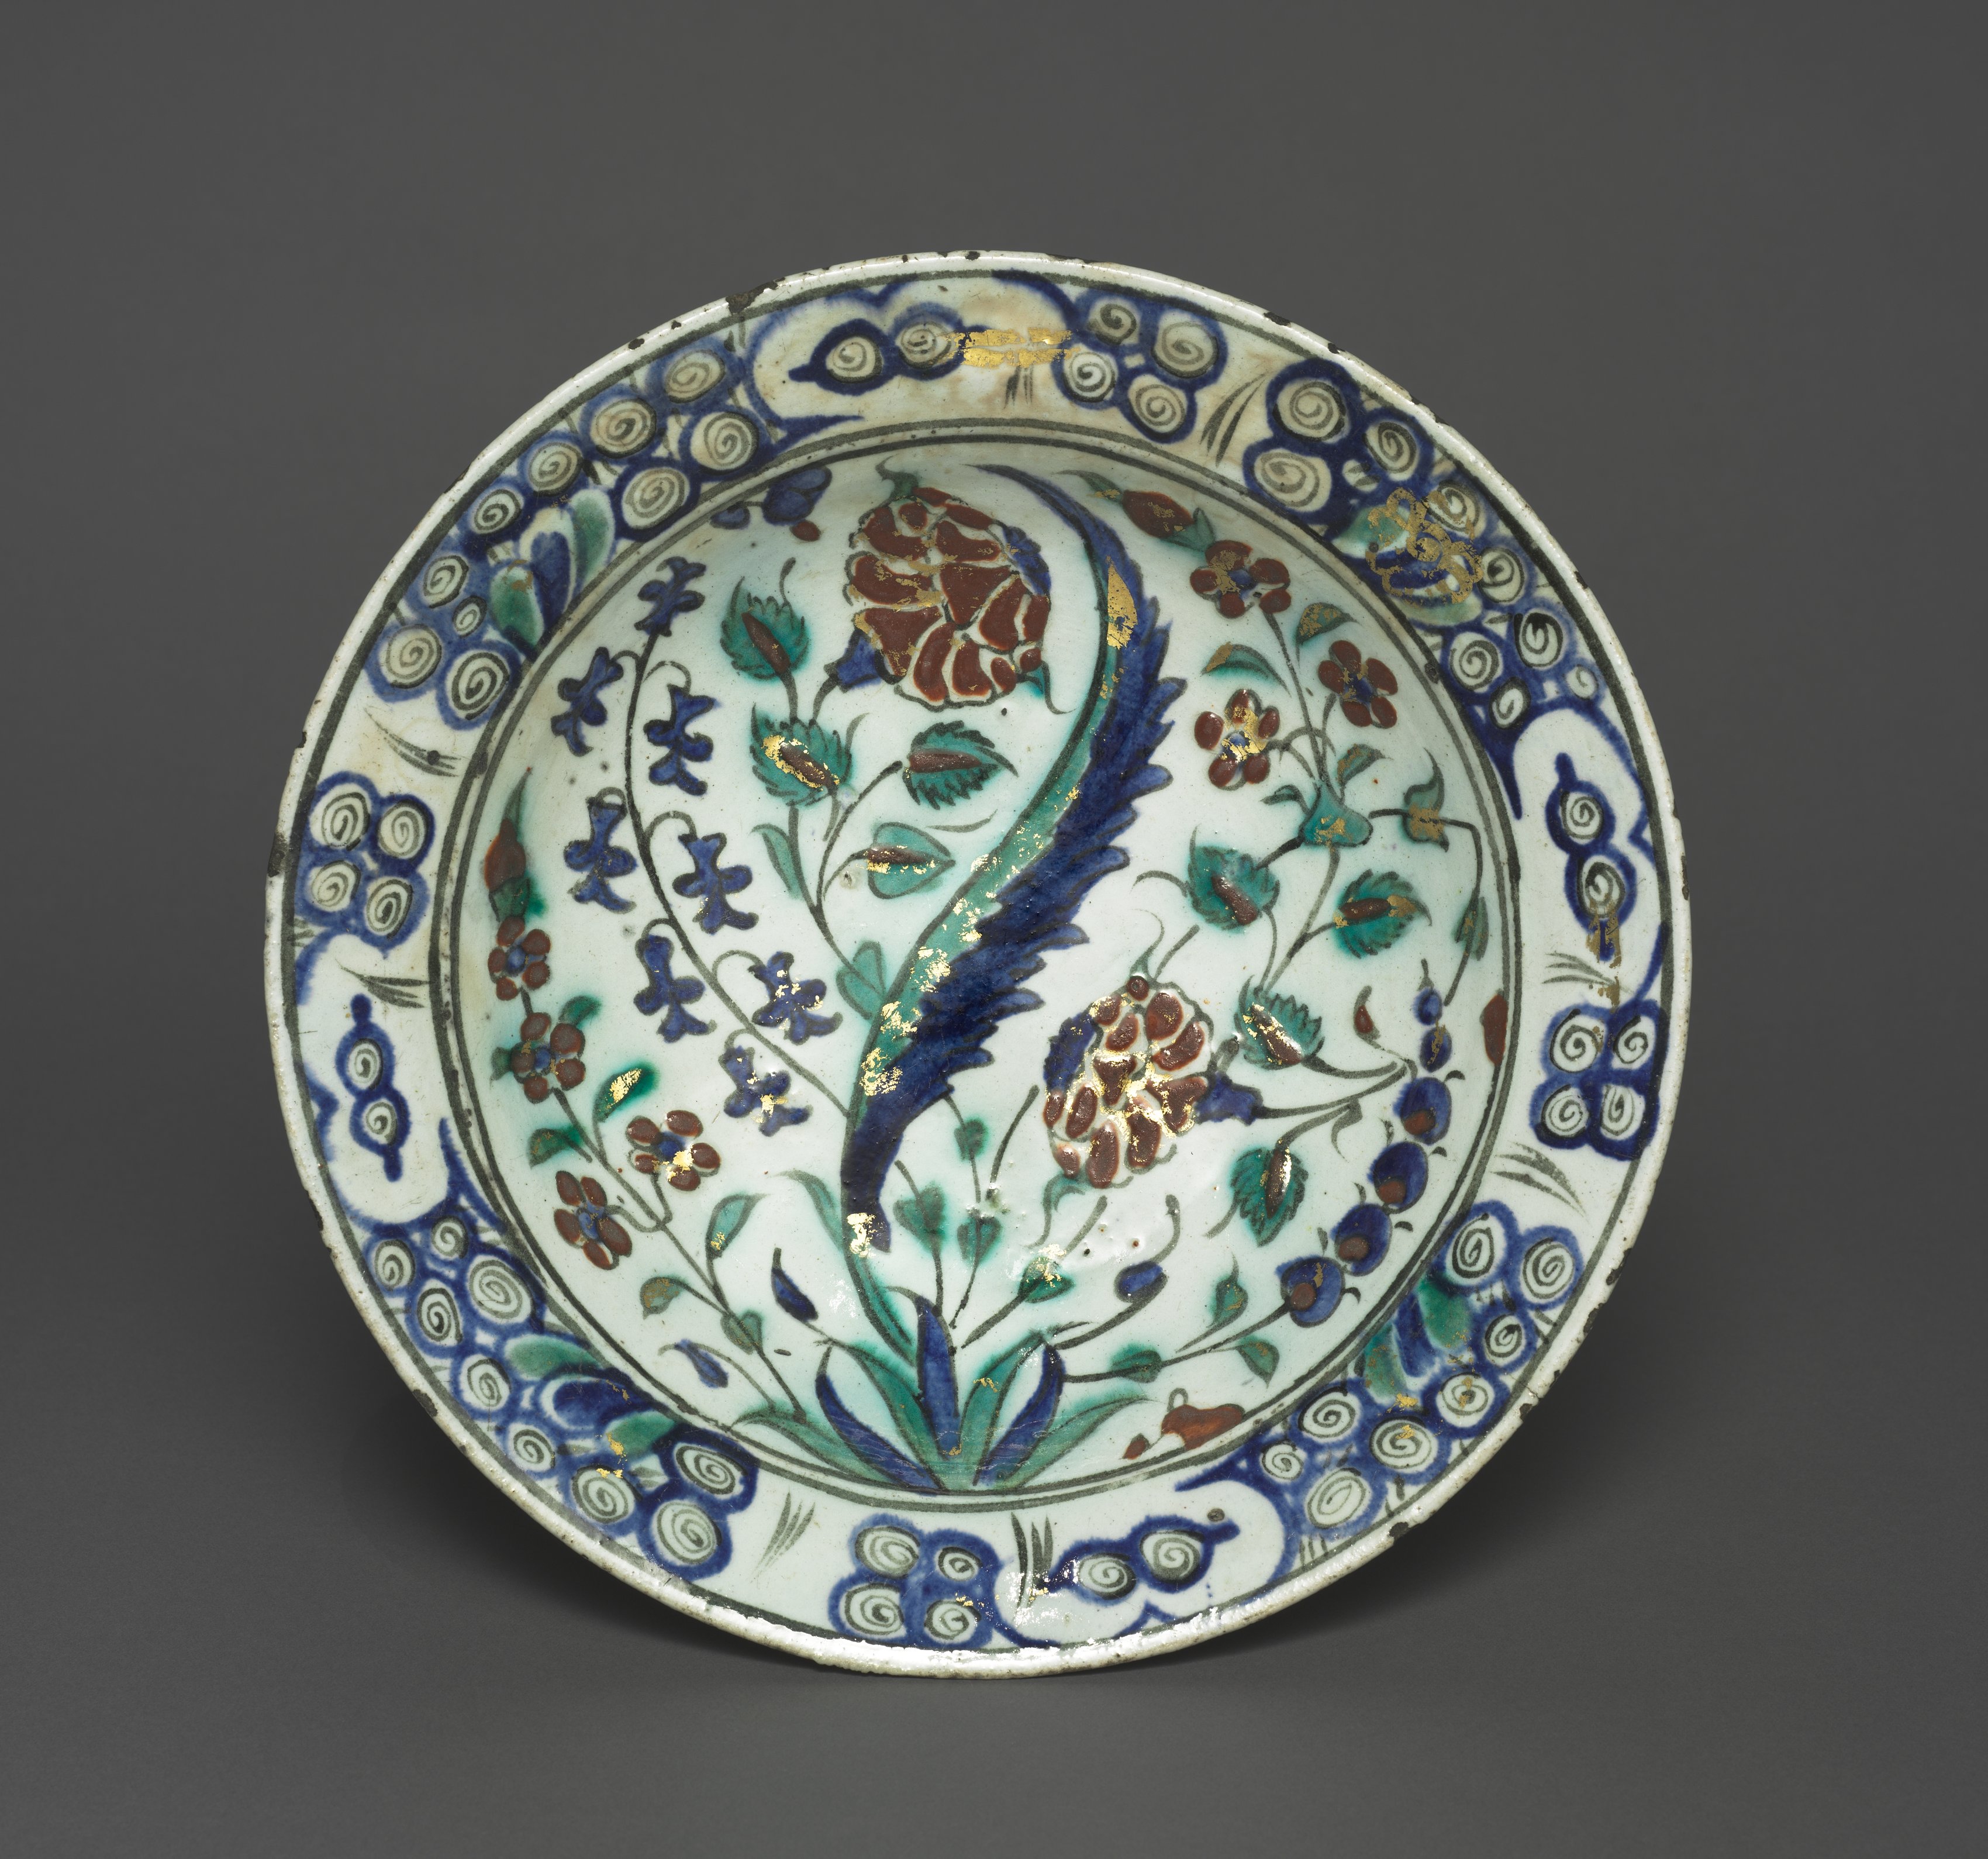 Gilded Dish with Flowers and Leaves